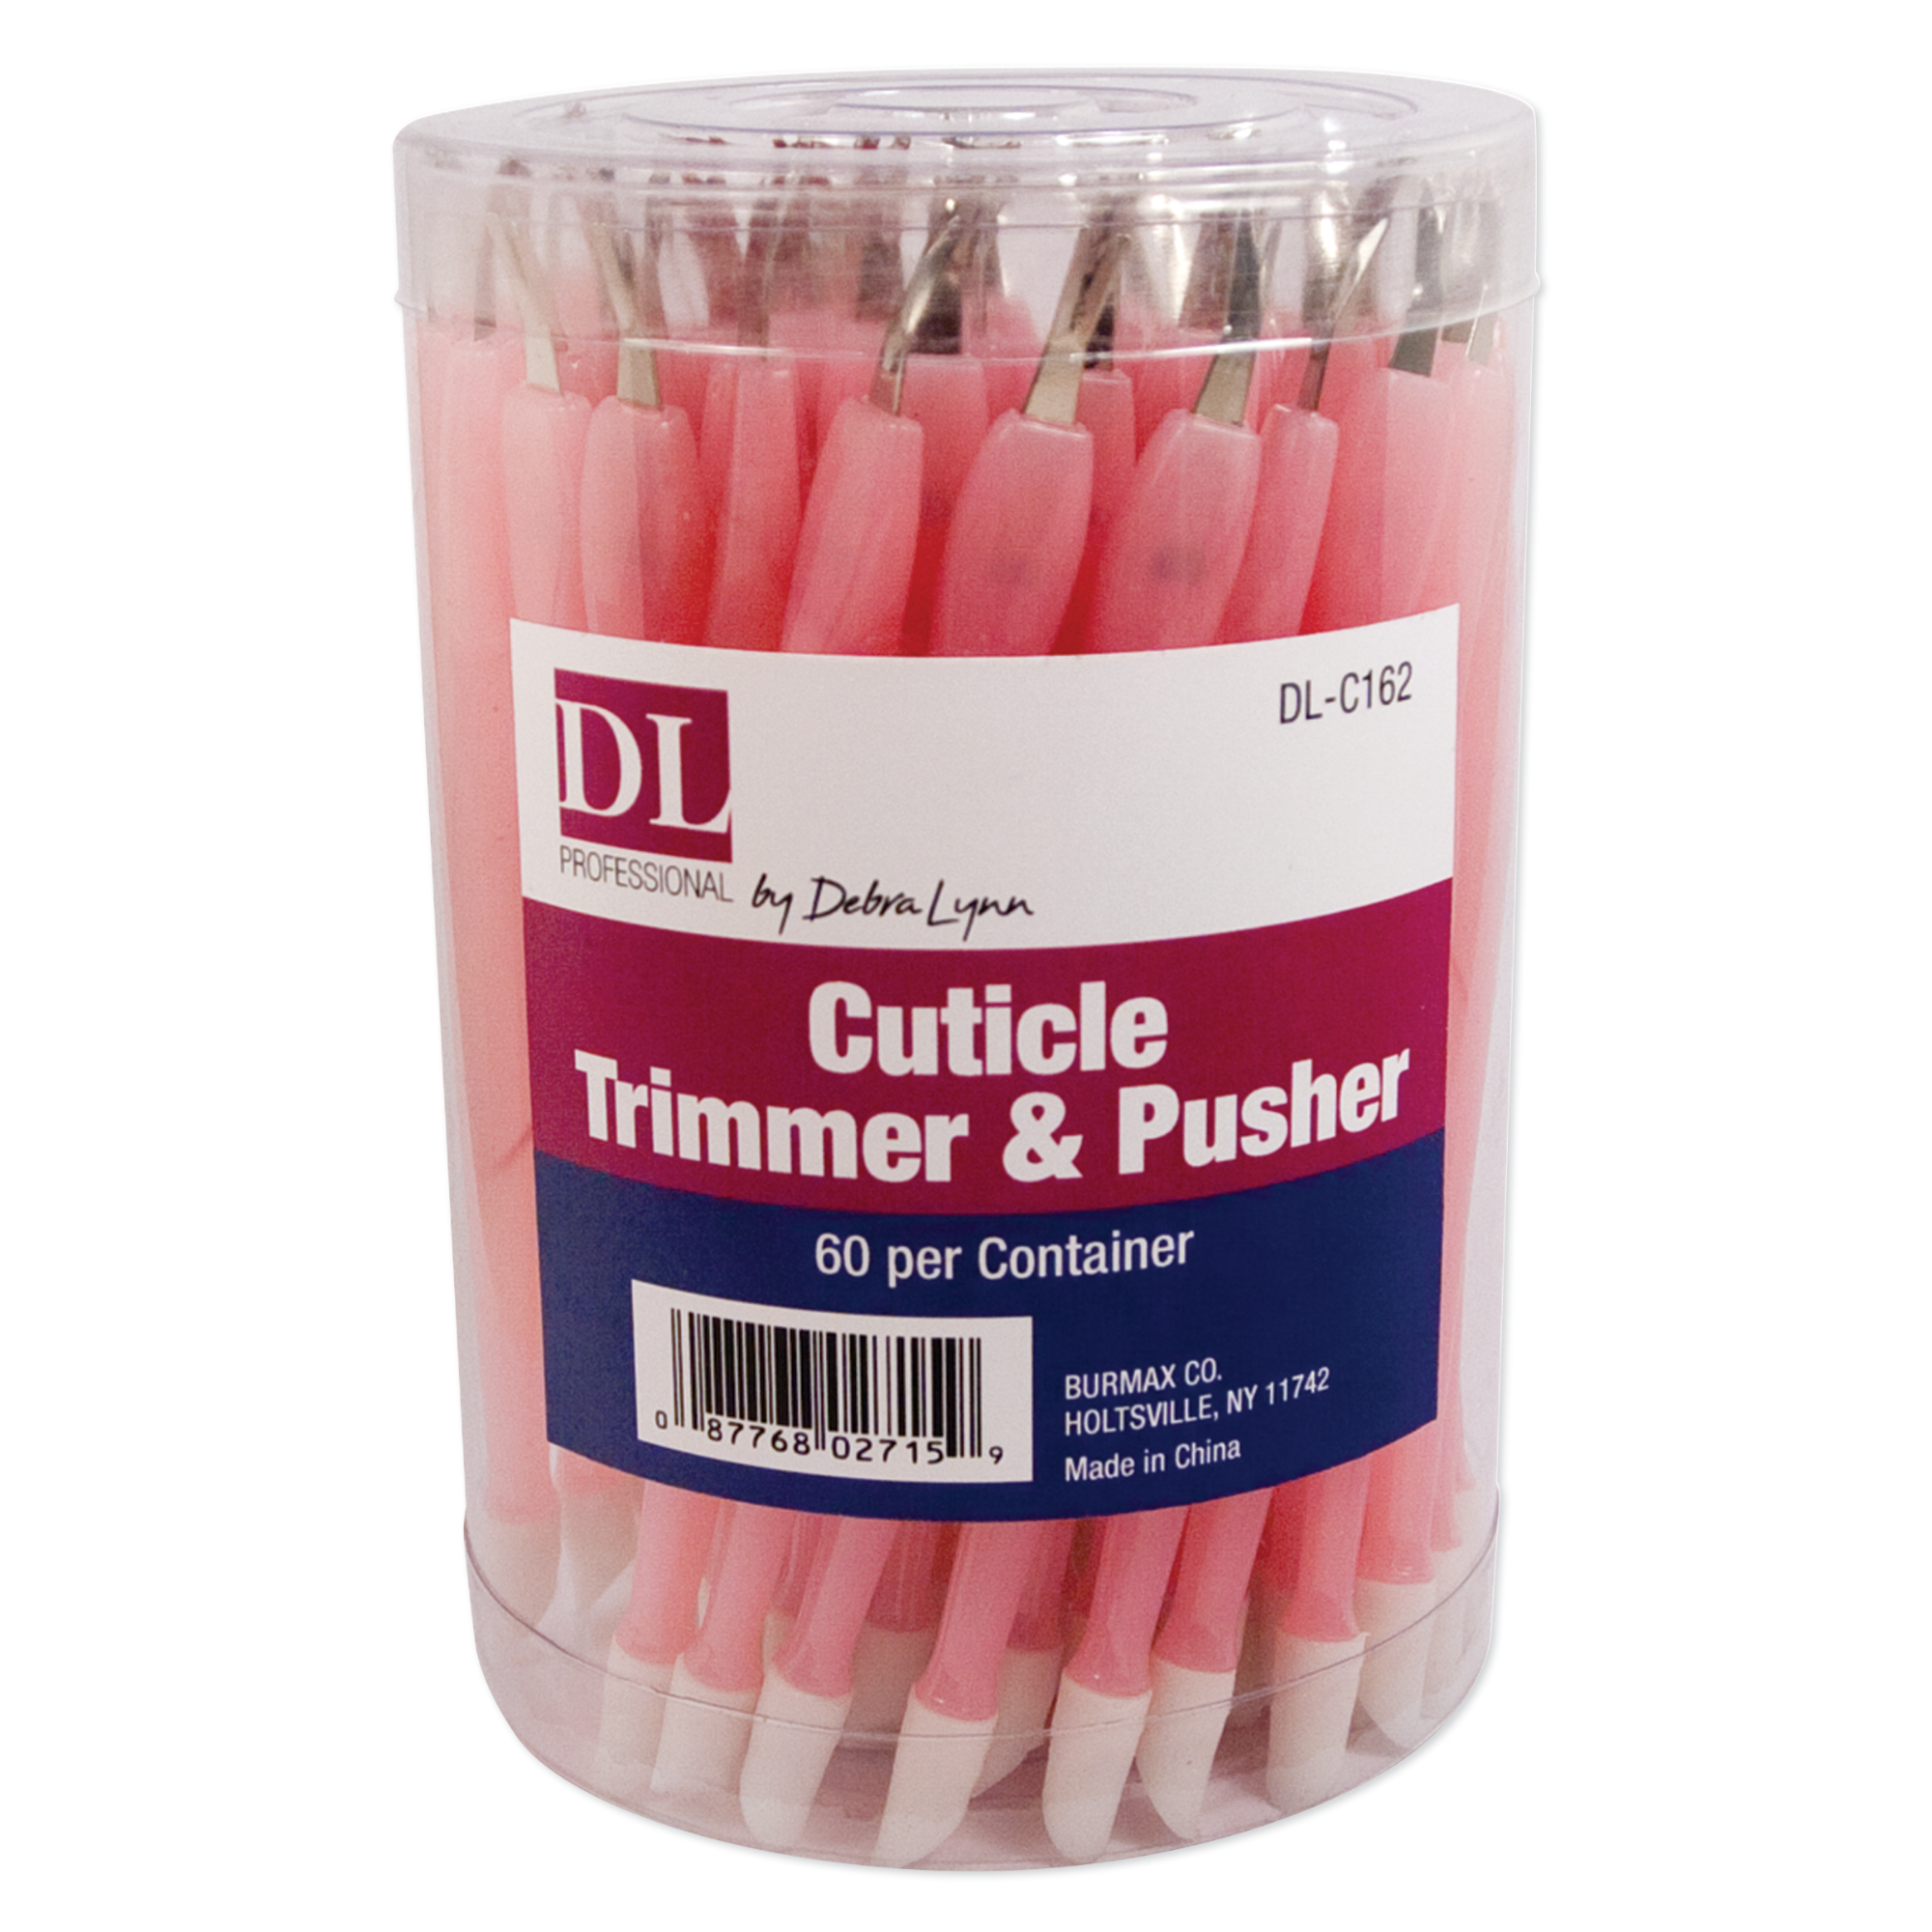 Cuticle Trimmer & Pushers, Container of 60